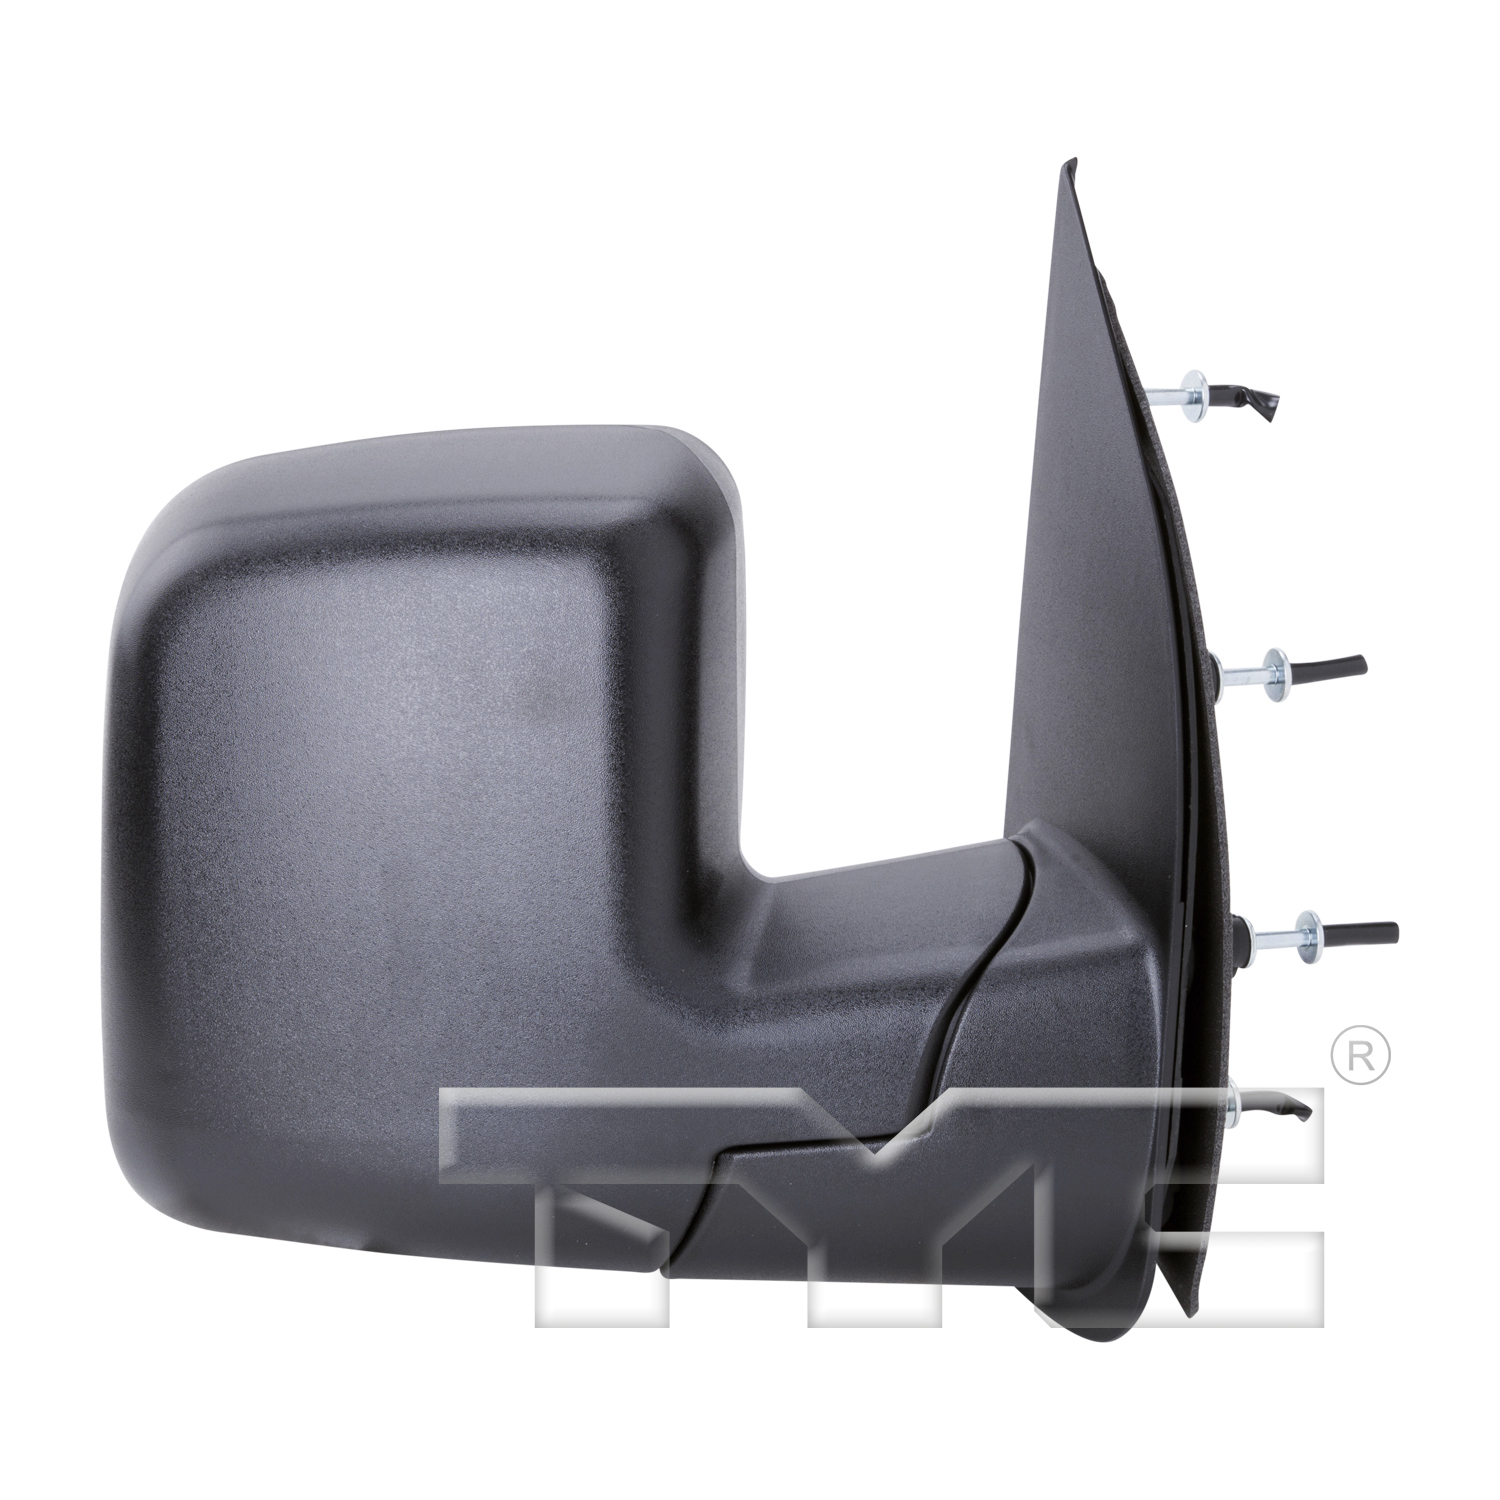 Aftermarket MIRRORS for FORD - E-150 CLUB WAGON, E-150 CLUB WAGON,03-05,RT Mirror outside rear view